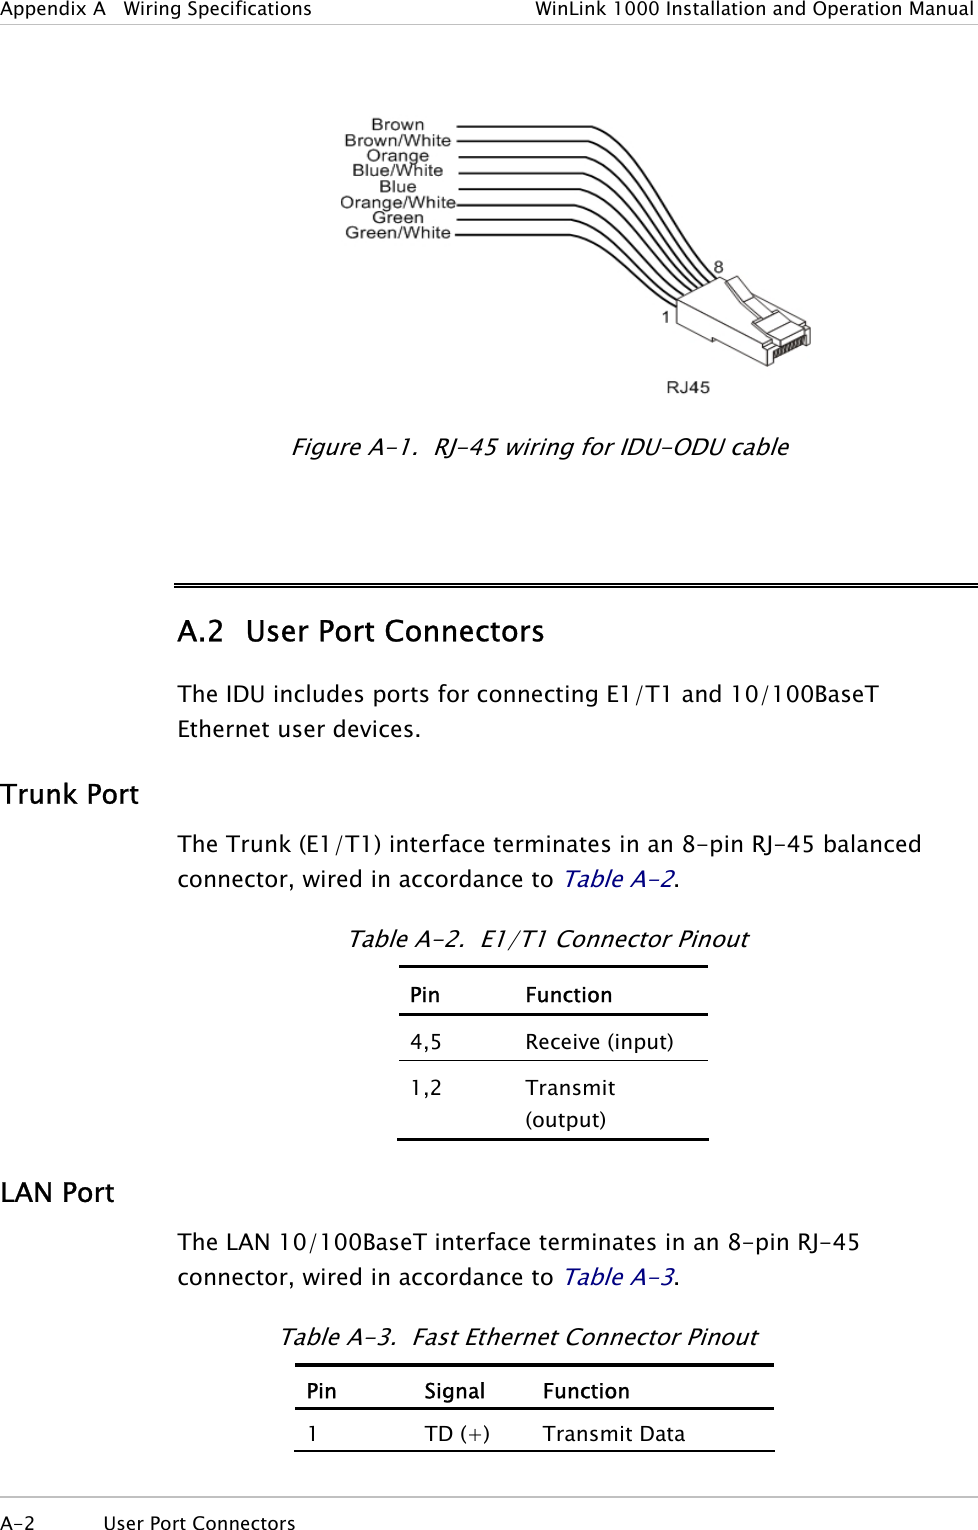 Appendix A   Wiring Specifications  WinLink 1000 Installation and Operation Manual    Figure  A-1.  RJ-45 wiring for IDU-ODU cable  A.2  User Port Connectors The IDU includes ports for connecting E1/T1 and 10/100BaseT Ethernet user devices. Trunk Port The Trunk (E1/T1) interface terminates in an 8-pin RJ-45 balanced connector, wired in accordance to Table  A-2. Table  A-2.  E1/T1 Connector Pinout Pin   Function 4,5 Receive (input) 1,2 Transmit (output) LAN Port The LAN 10/100BaseT interface terminates in an 8-pin RJ-45 connector, wired in accordance to Table  A-3. Table  A-3.  Fast Ethernet Connector Pinout Pin Signal Function 1  TD (+)  Transmit Data A-2  User Port Connectors   